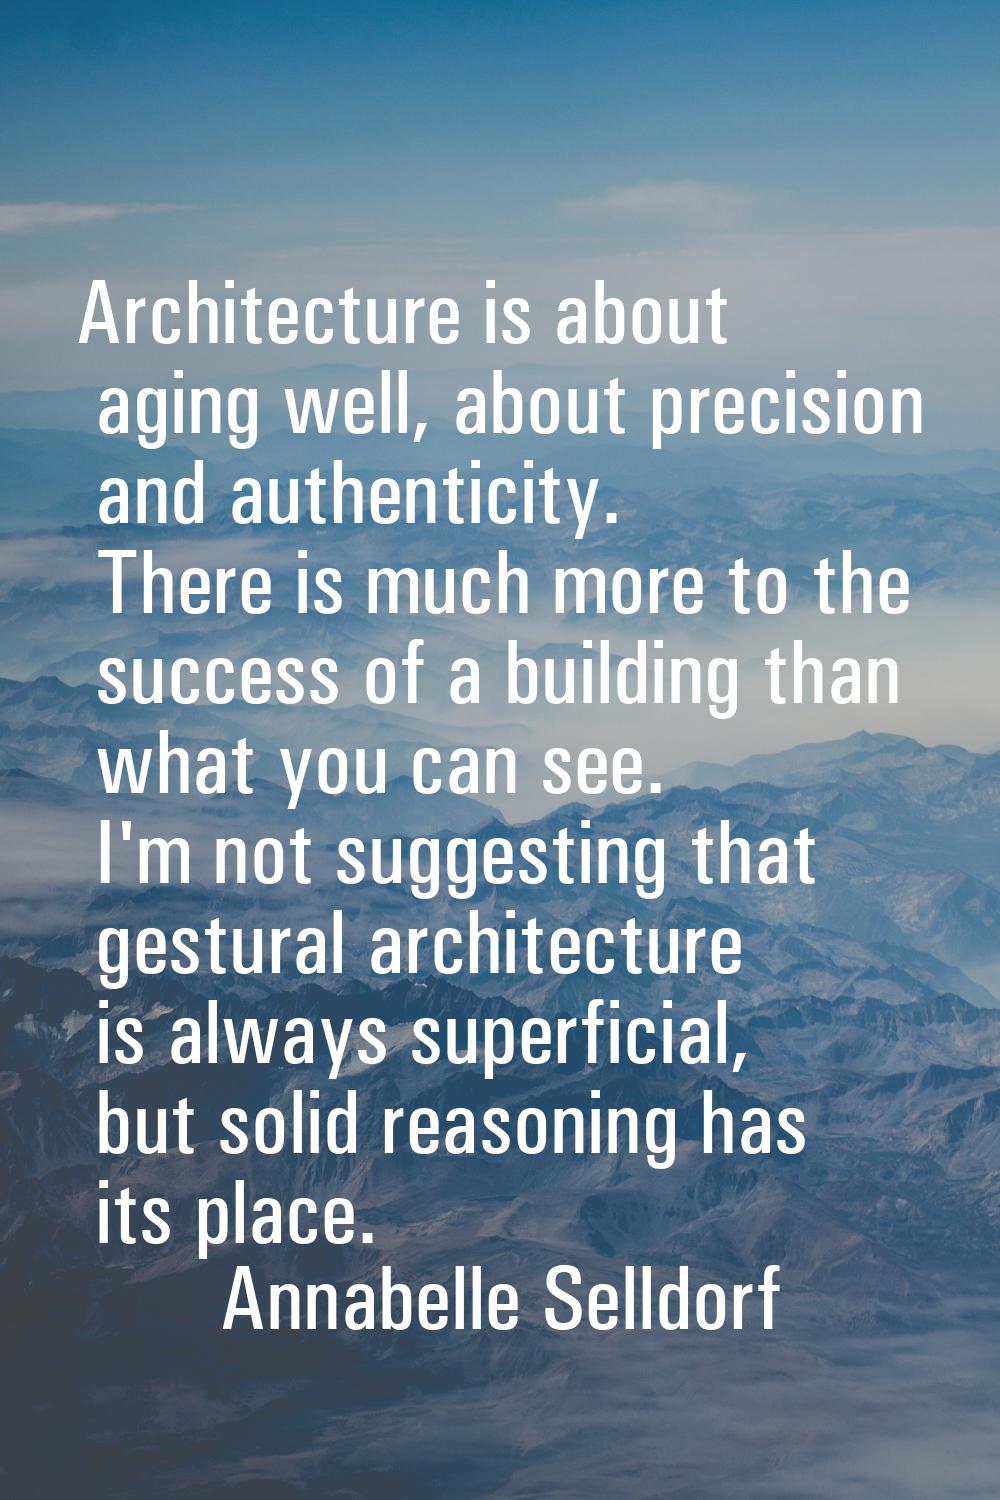 Architecture is about aging well, about precision and authenticity. There is much more to the succe